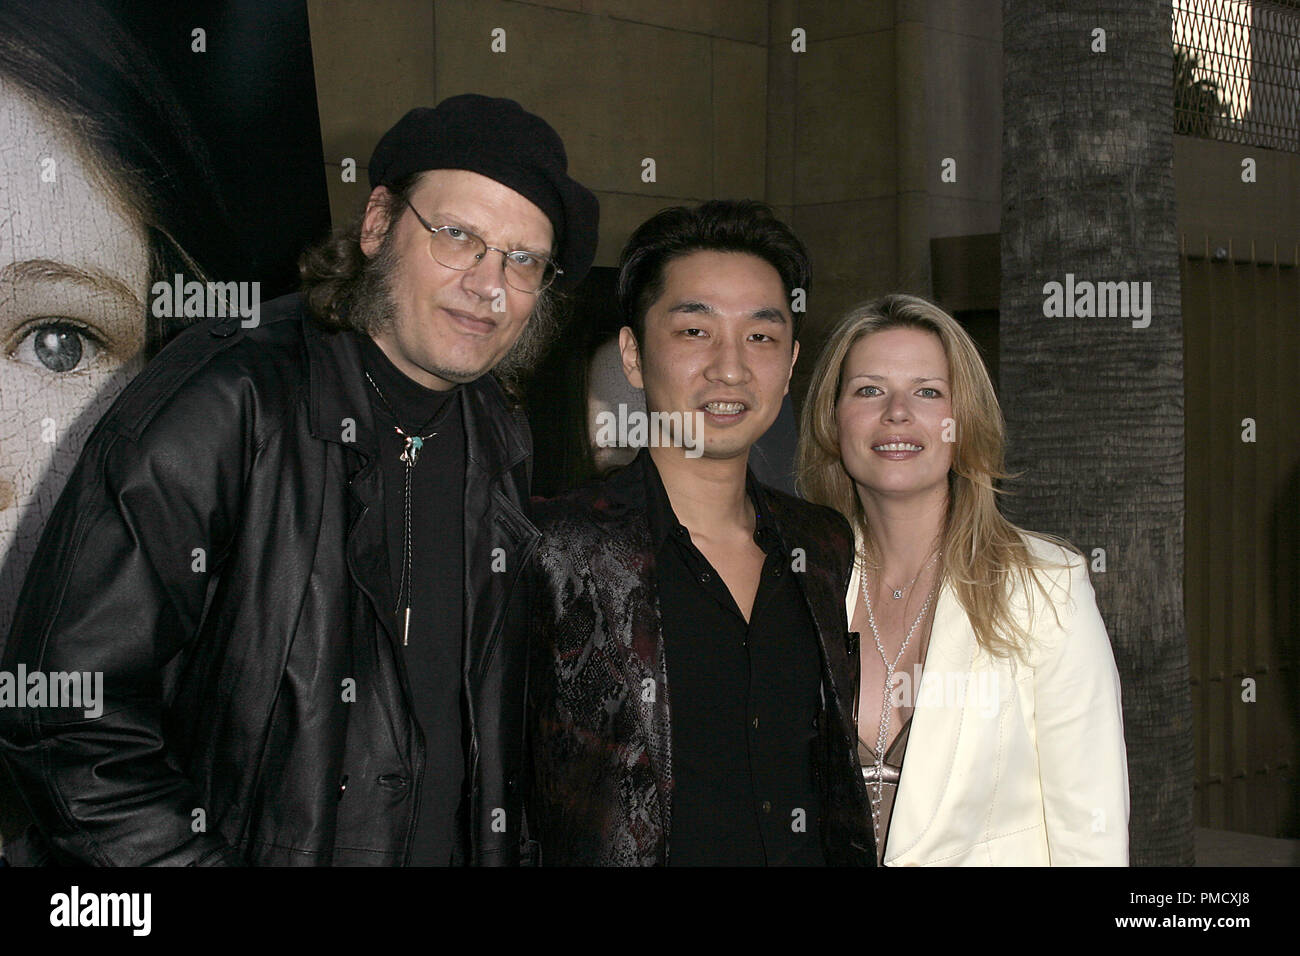 Silent Hill (Premiere) Joe Romersa, Akira Yamaoka, Mary Elizabeth 04-20-2006 / Egyptian Theatre / Hollywood, CA / TriStar Pictures / Photo by Joseph Martinez - All Rights Reserved   File Reference # 22719 0024PLX  For Editorial Use Only - Stock Photo